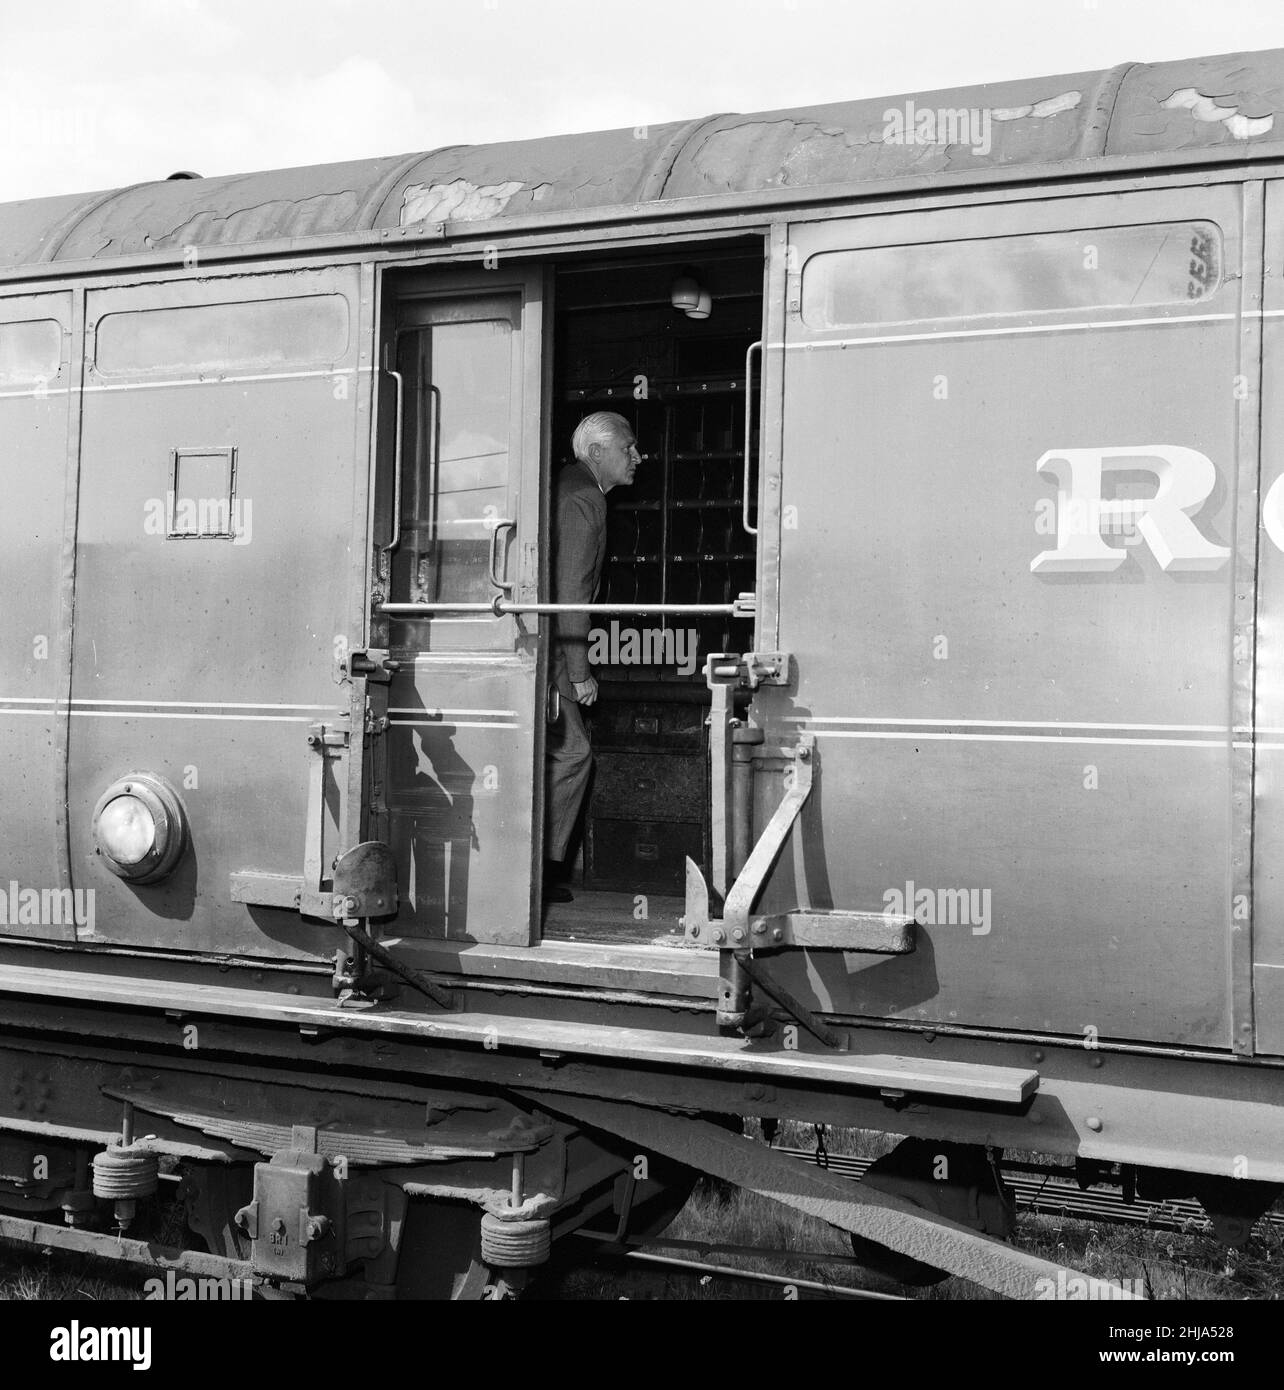 1963 Great Train Robbery was the robbery of ¿2.6 million from a Royal Mail train heading from Glasgow to London on the West Coast Main Line in the early hours of 8th August 1963, at Bridego Railway Bridge, Ledburn, near Mentmore in Buckinghamshire, England. Our Picture Shows ... Detective Superintendent Malcolm Fewtrell, Head of Buckinghamshire CID examines the mail carriage in the sidings at Cheddington Train Station, Friday 9th August 1963. Stock Photo